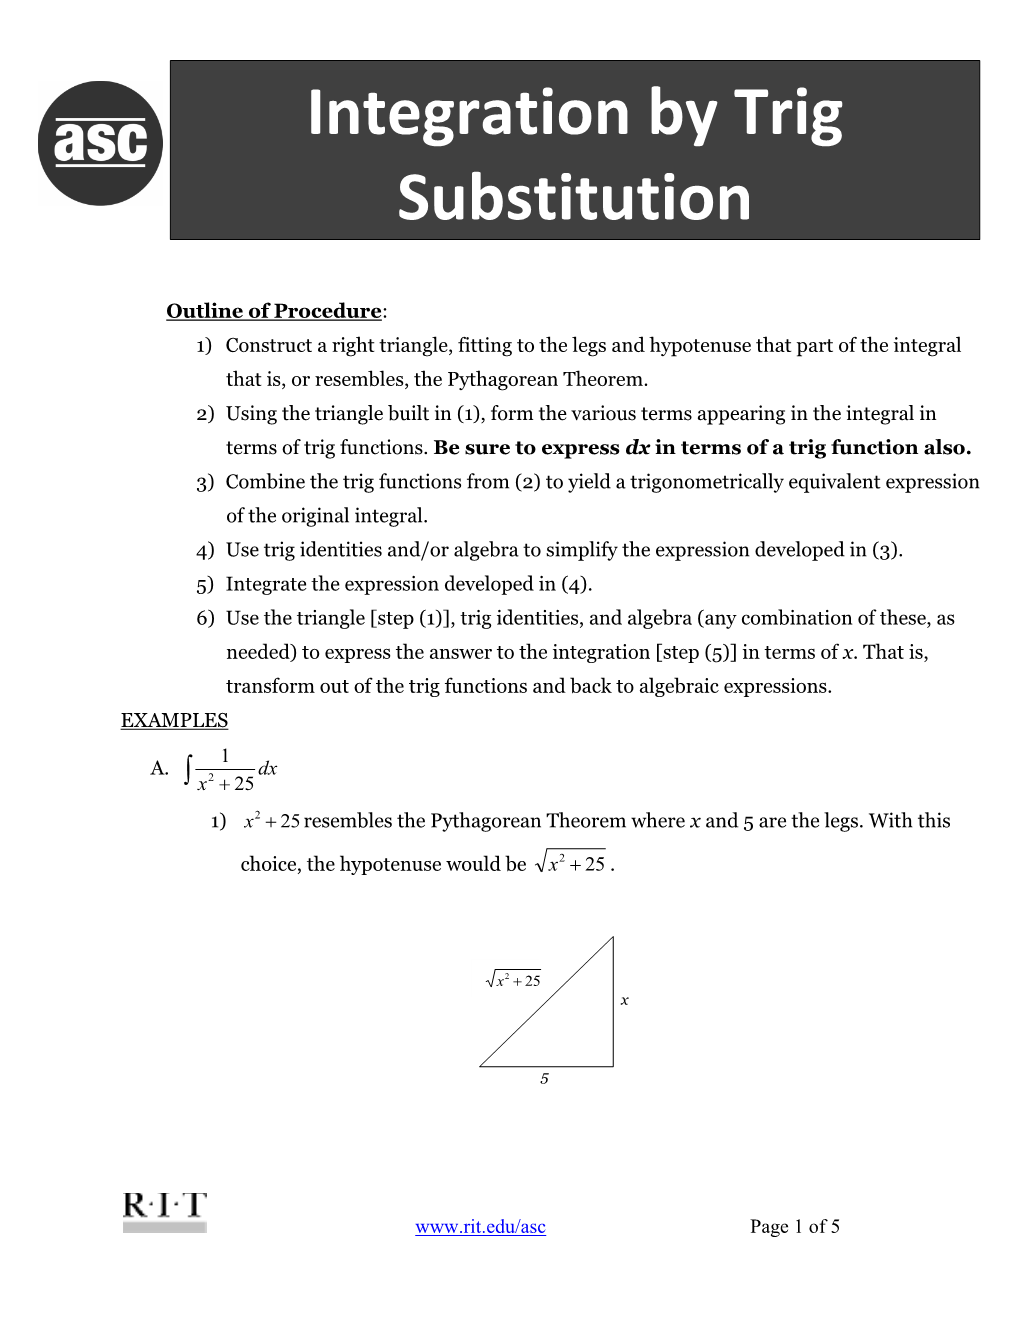 Integration by Trig Substitution